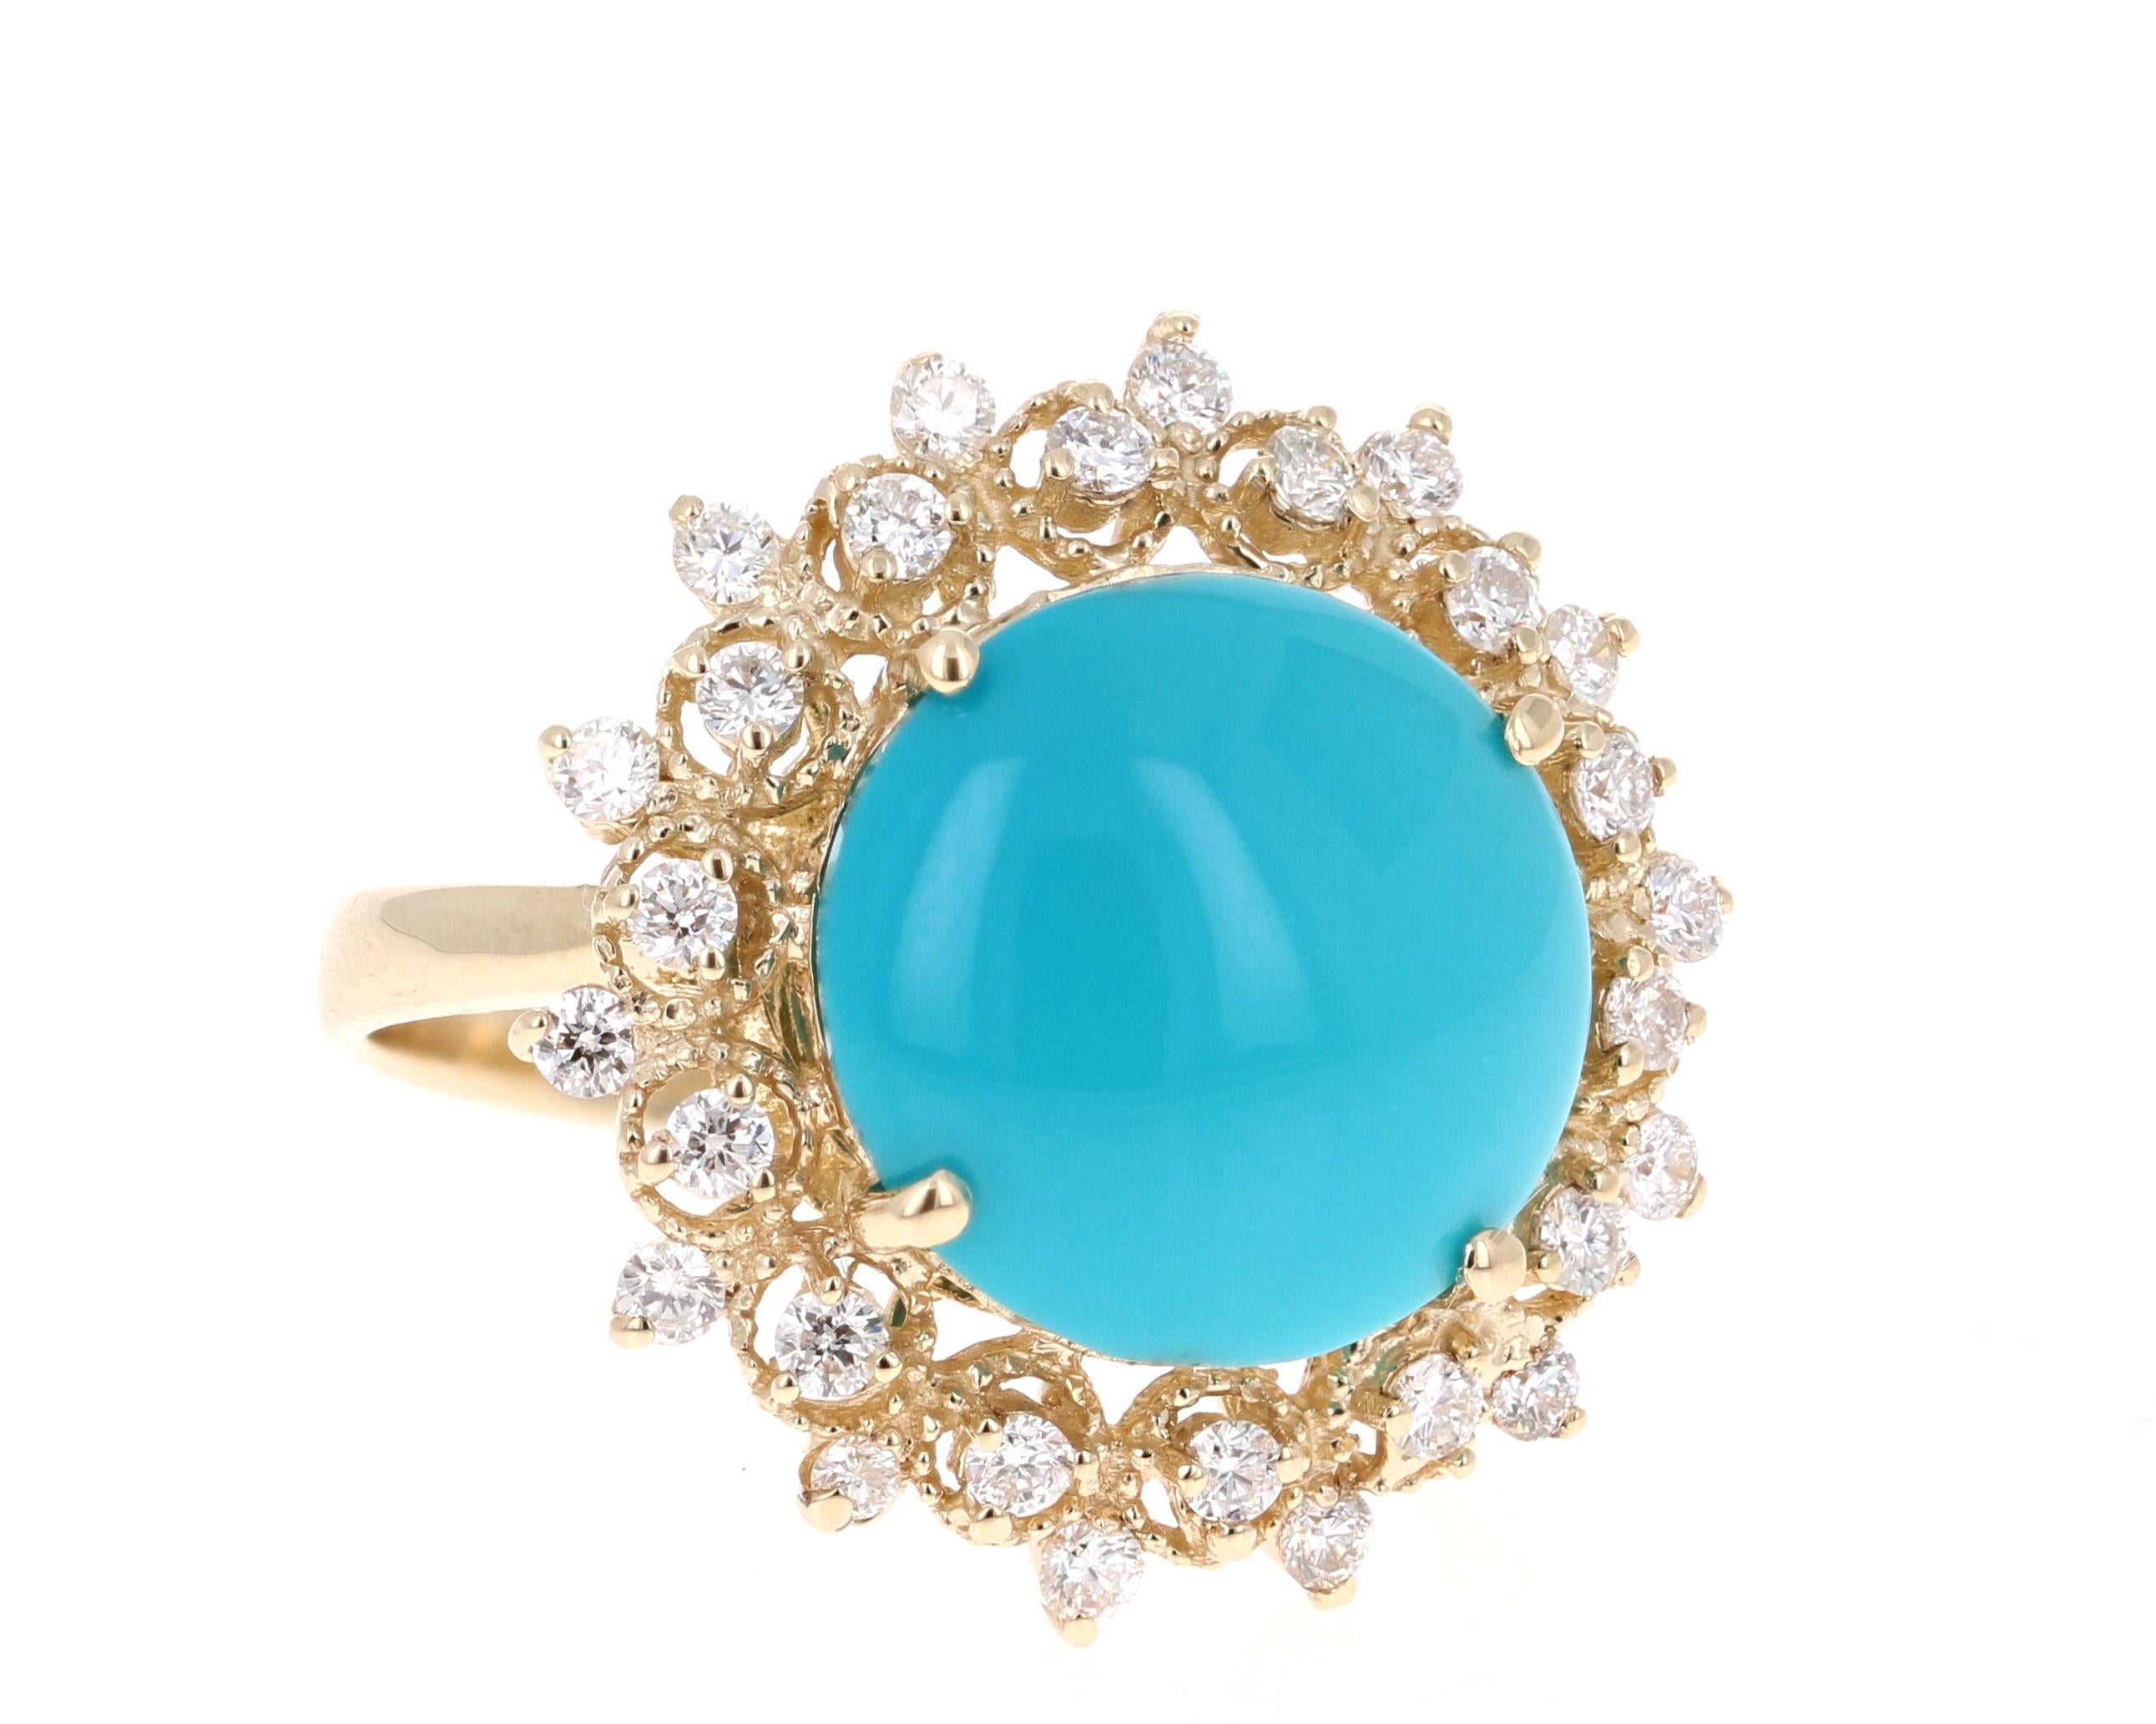 This gorgeous cocktail ring has a beautiful Round Cut Turquoise that weighs 5.32 carats and 20 Round Cut Diamonds that weigh 0.61 carats. The Clarity and Color of the Diamonds are SI2-F.  The total carat weight of the ring is 5.93 carats. 

It is